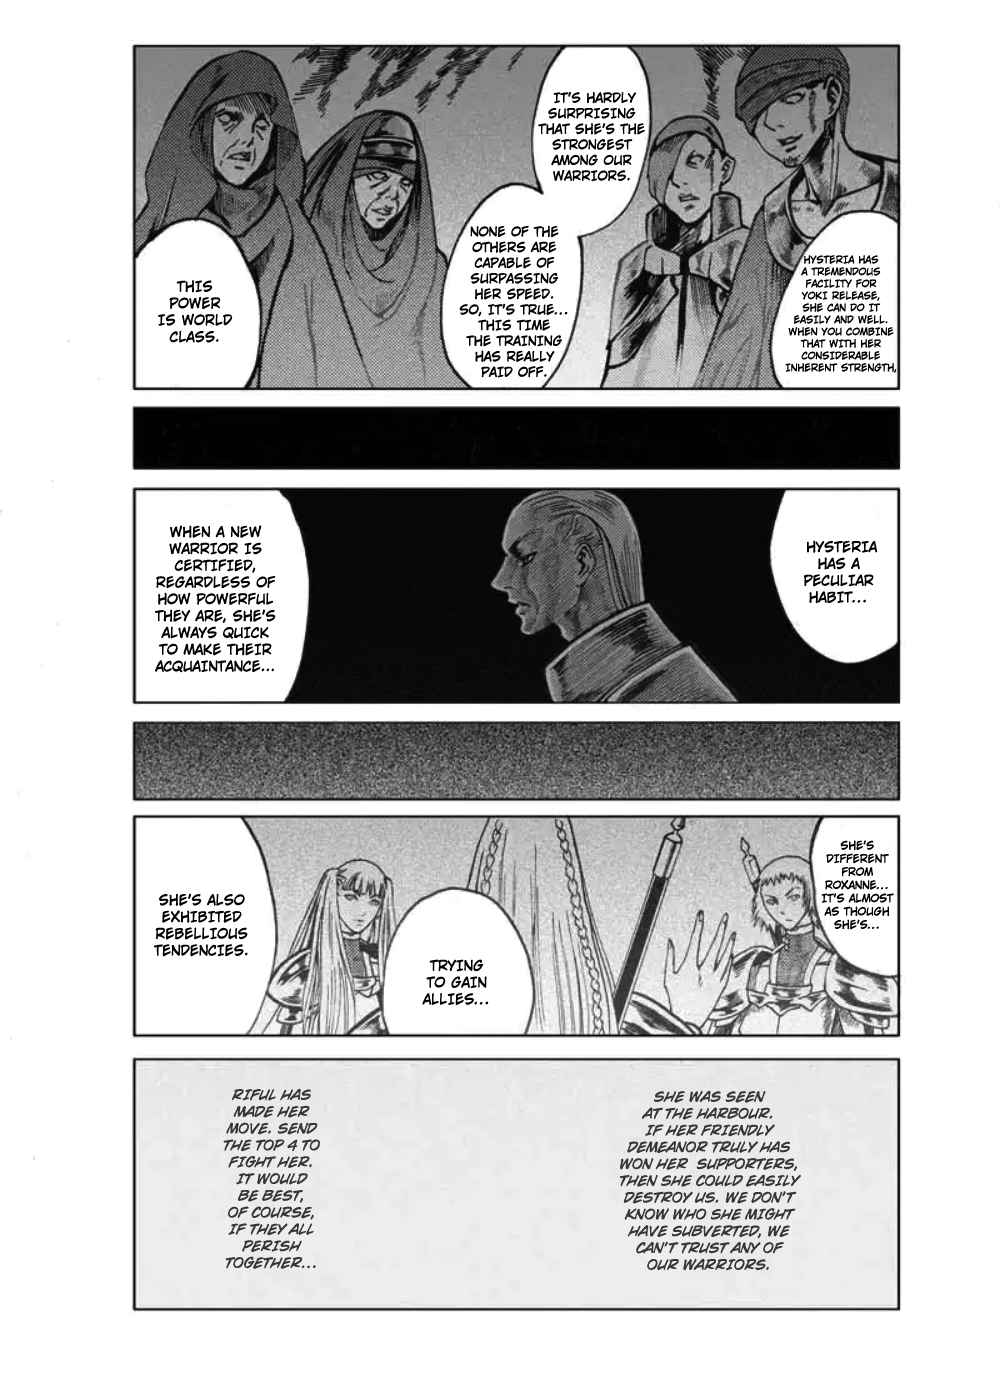 Claymore - The Warrior's Wedge (doujinshi) Ch.7